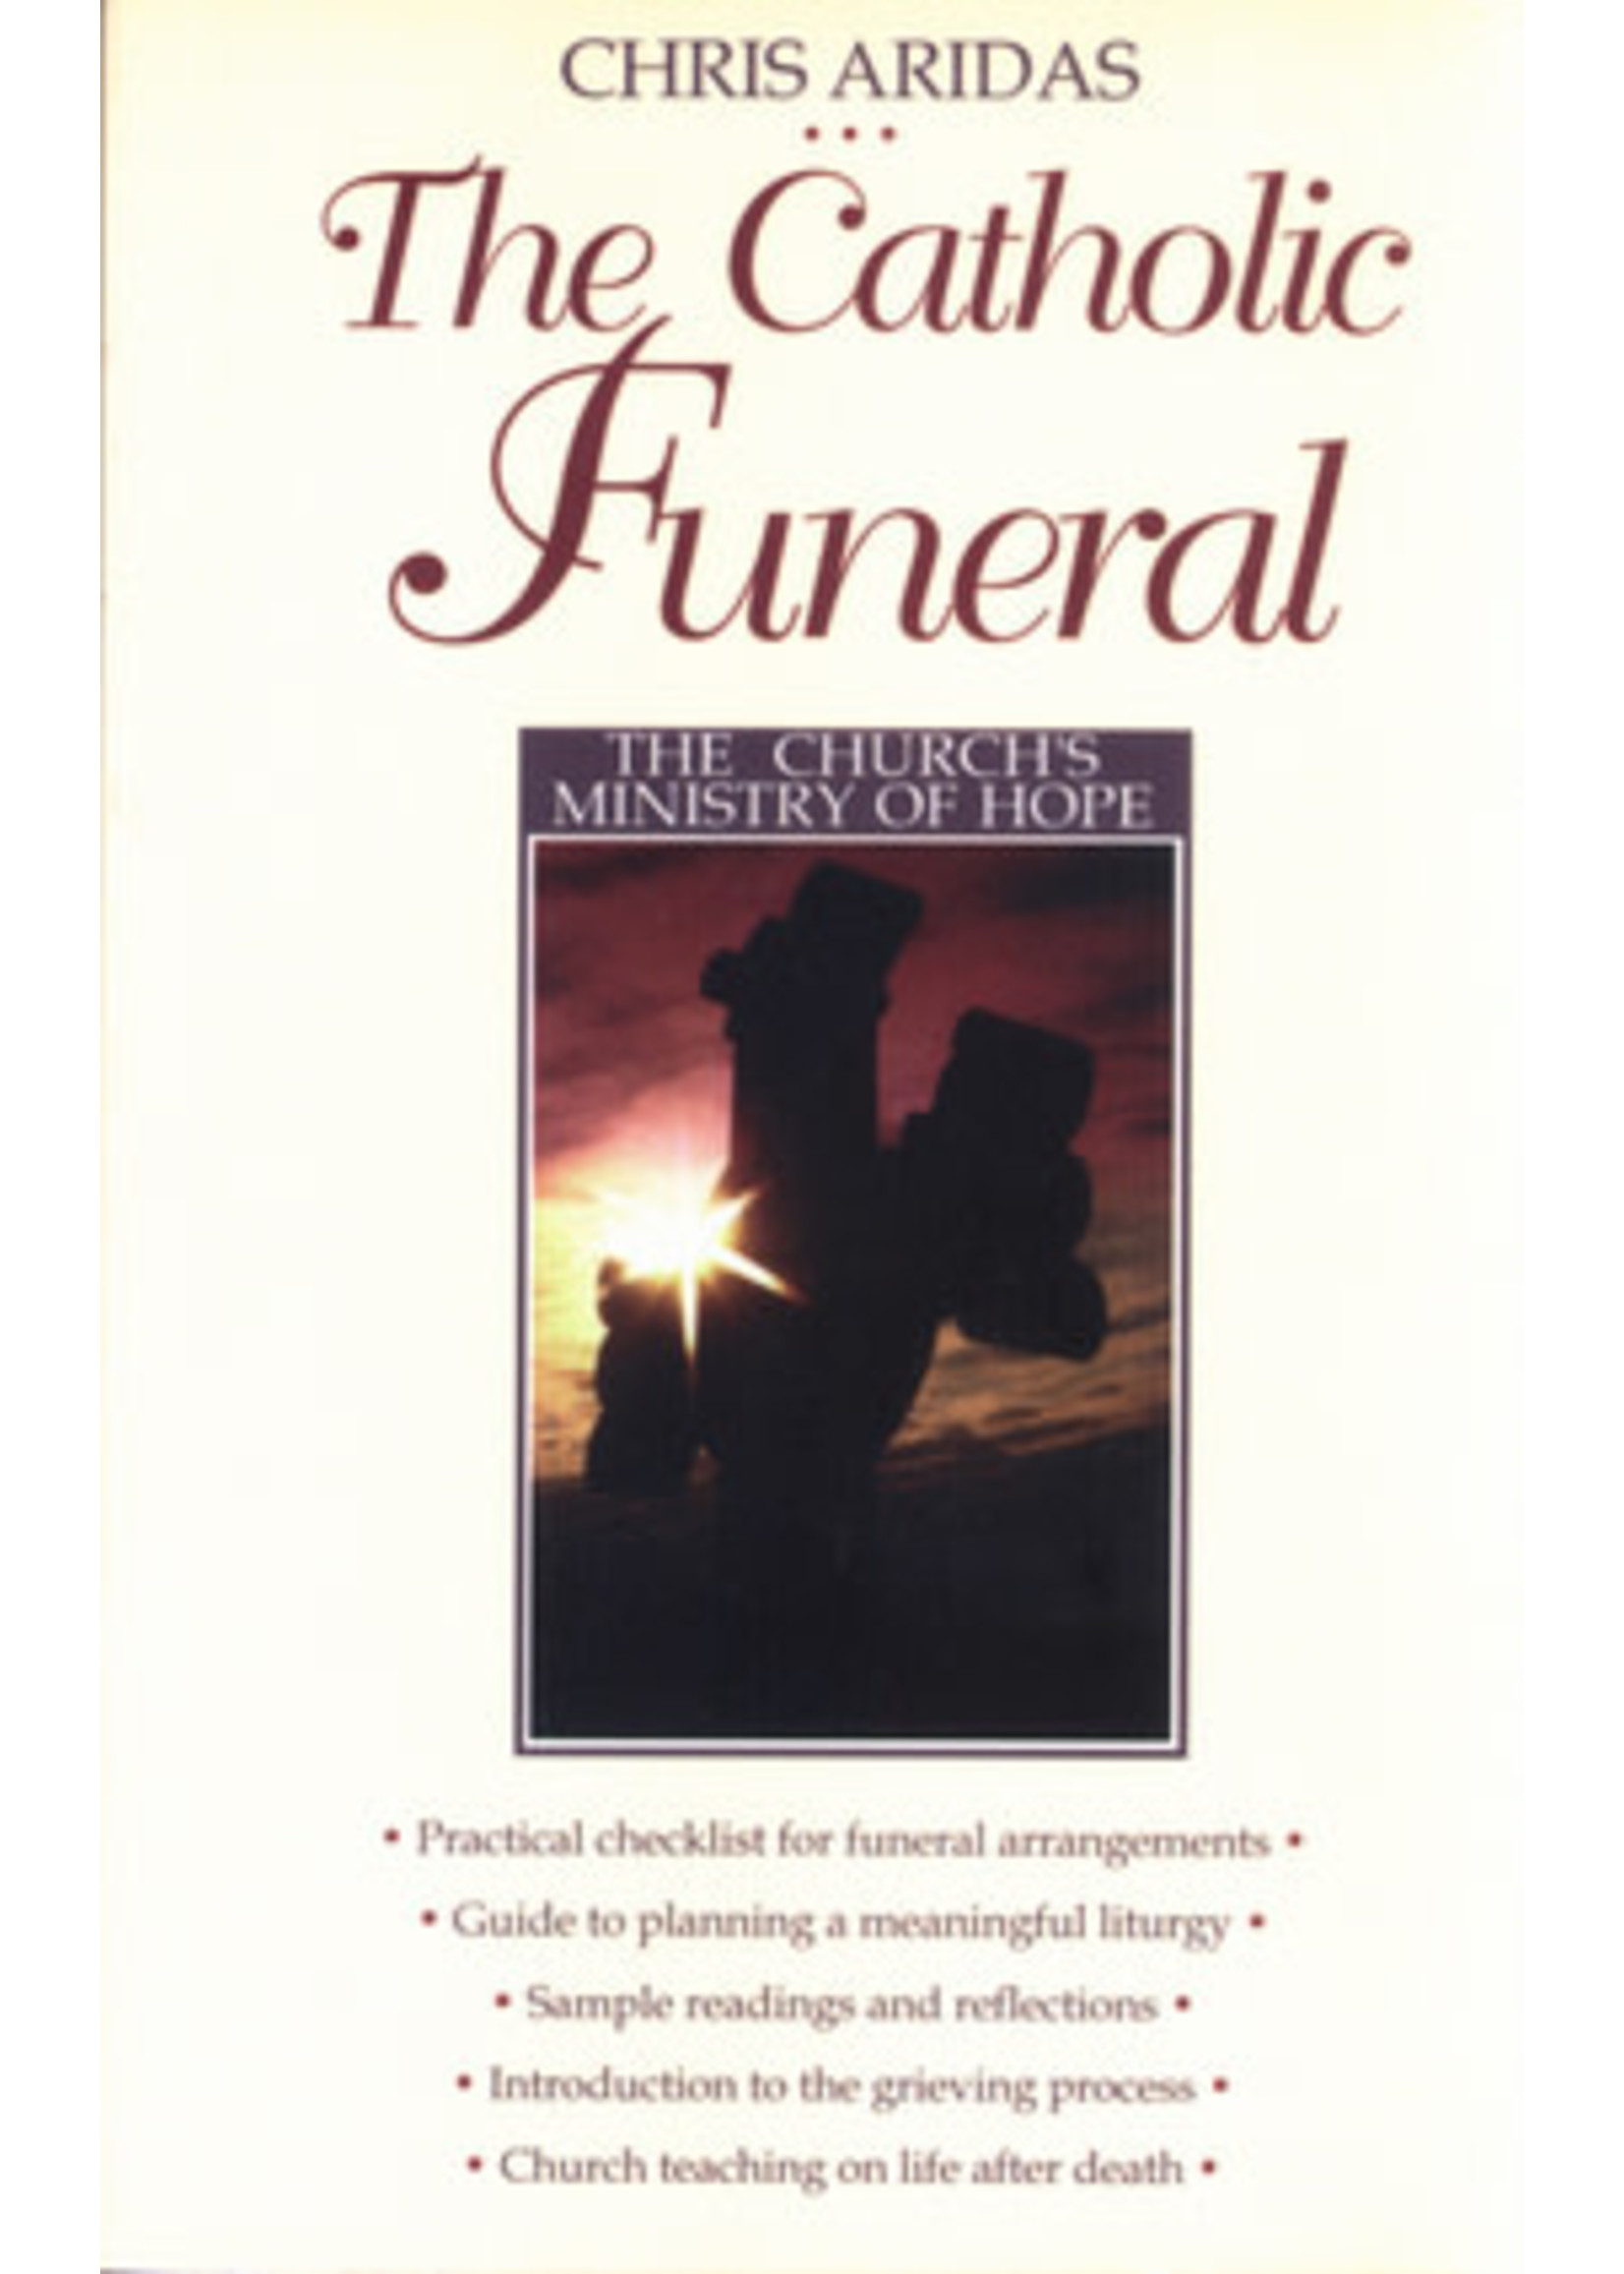 The Catholic Funeral: The Church's Ministry of Hope